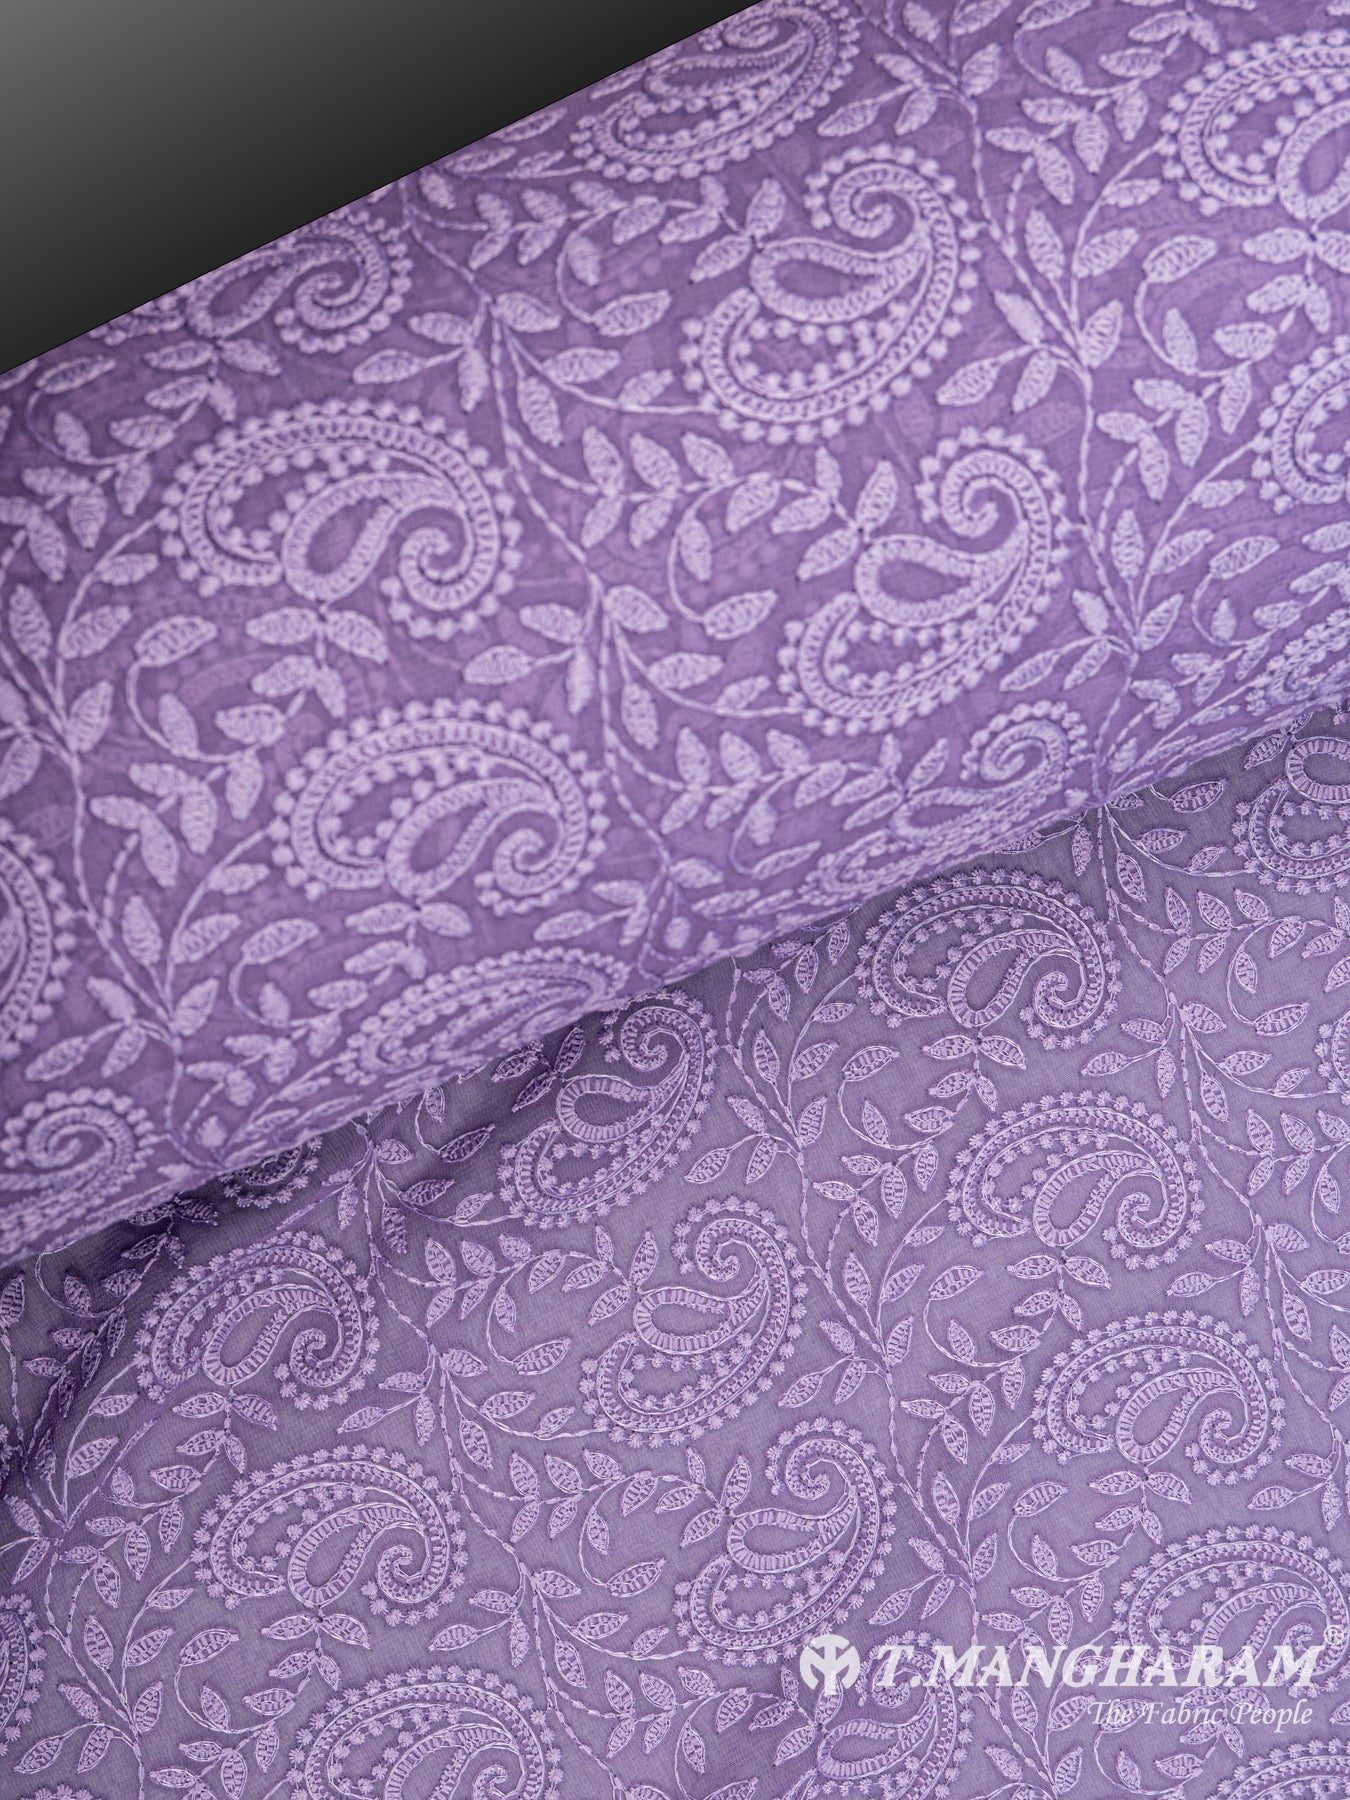 Violet Georgette Embroidery Fabric - EC6532 view-2